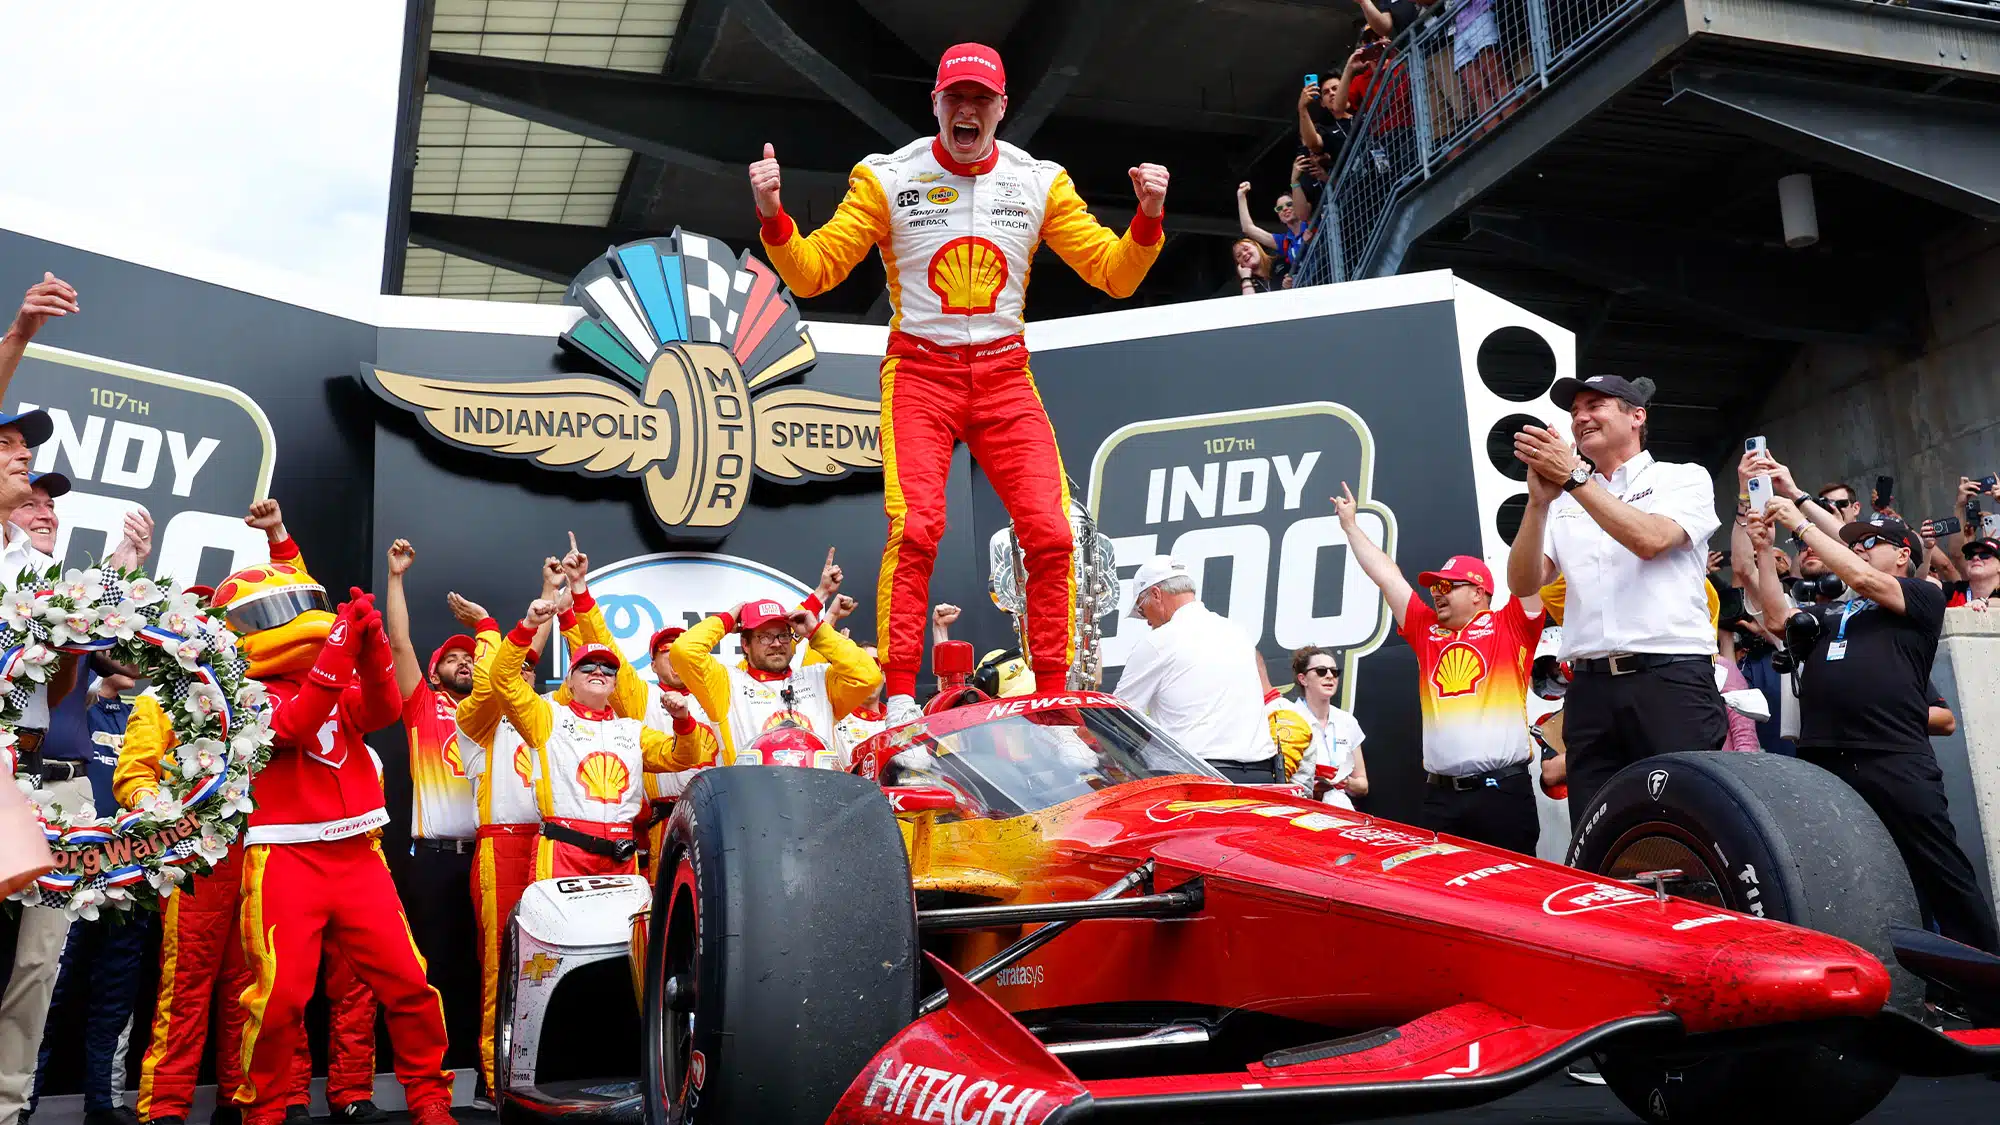 Smashes, red flags and curses in dramatic Indy 500 finish 'Next time